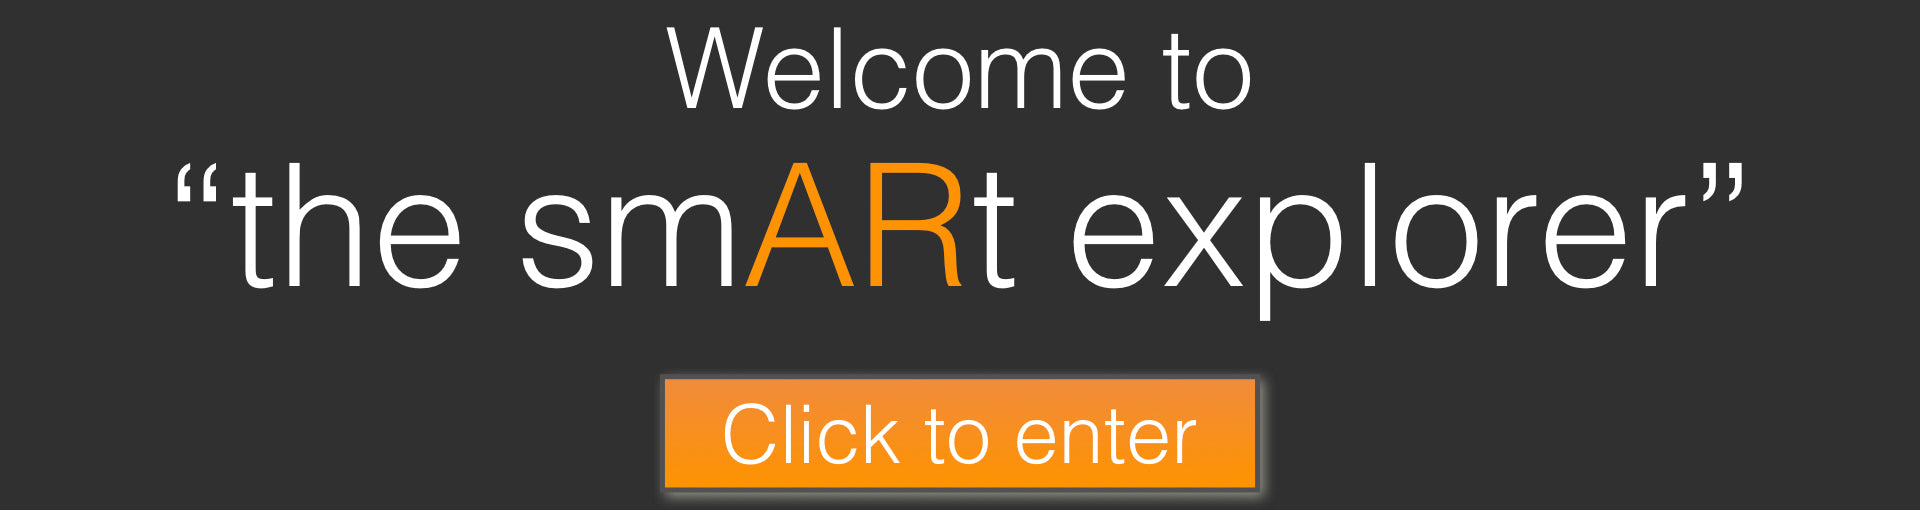 Welcome to the smart Explorer